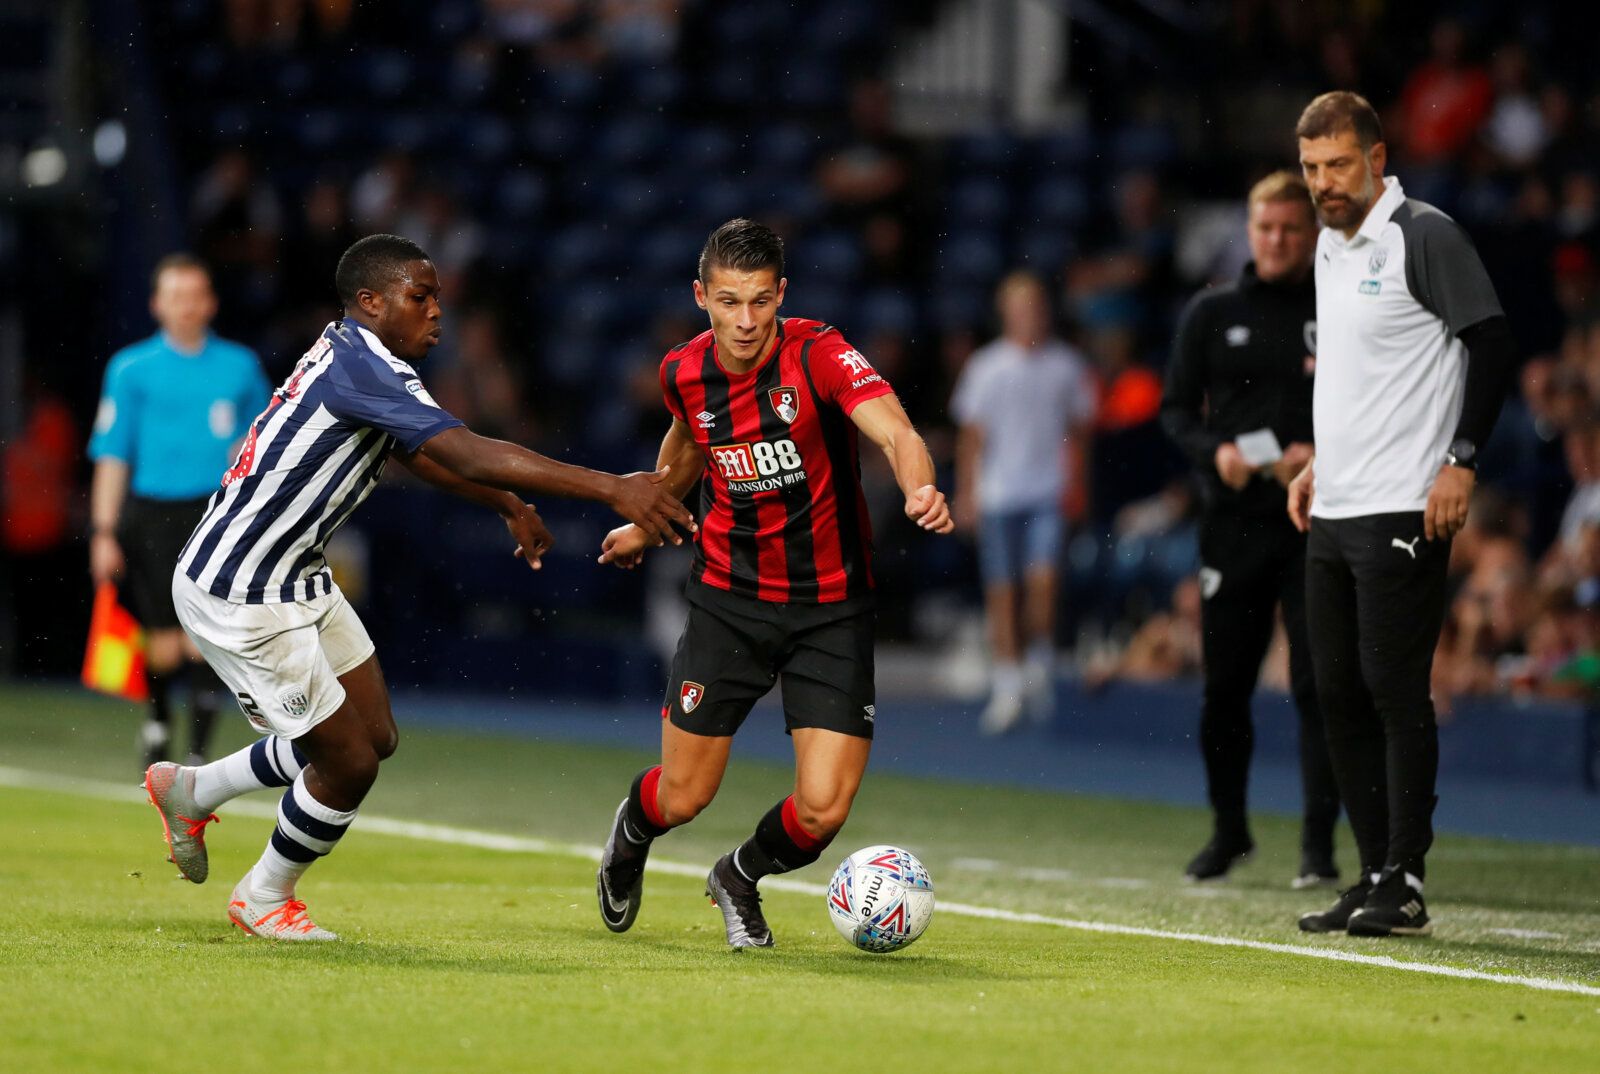 Soccer Football - Pre Season Friendly - West Bromwich Albion v AFC Bournemouth - The Hawthorns, West Bromwich, Britain - July 26, 2019   West Brom's Nathan Ferguson in action with Bournemouth's Alex Dobre as West Brom manager Slaven Bilic looks on   Action Images via Reuters/Matthew Childs